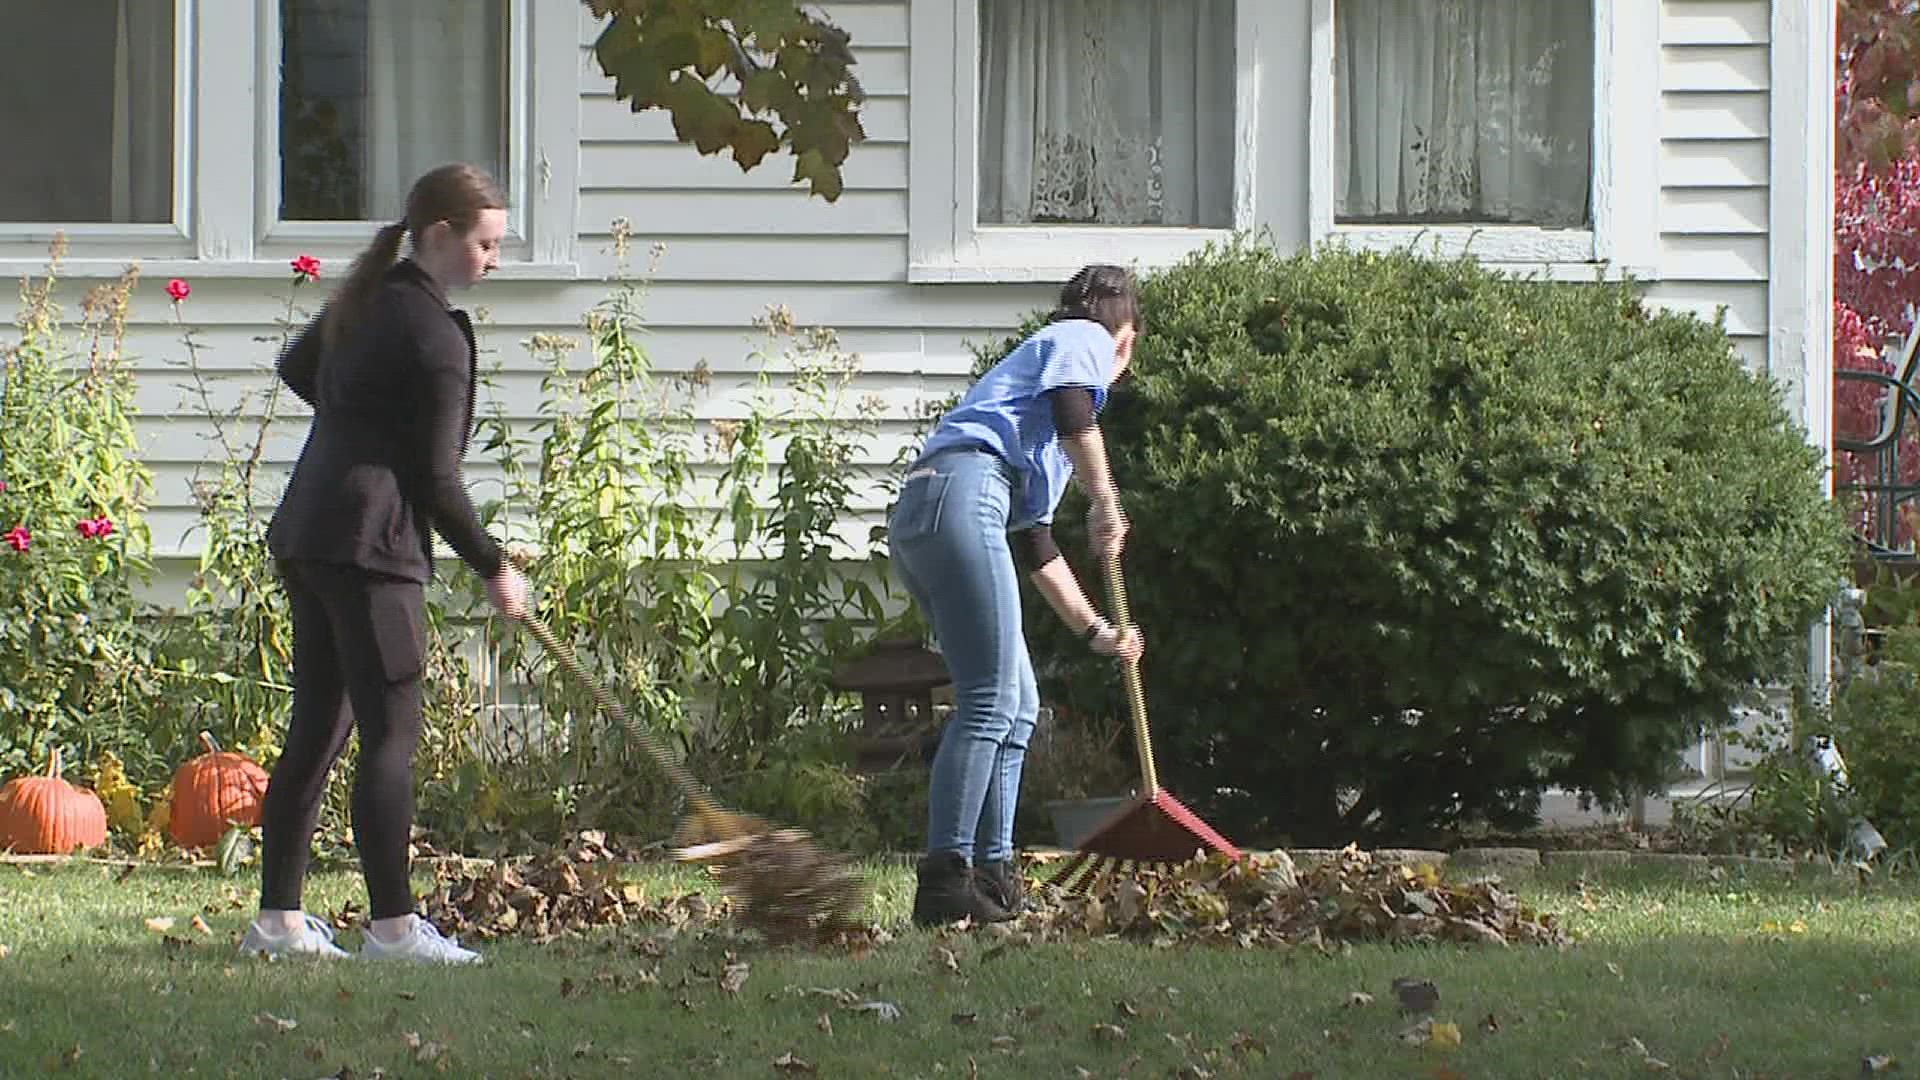 Hundreds of students at St. Ambrose gathered to rake leaves, pull weeds and trim bushes at neighborhood houses on Sunday afternoon.